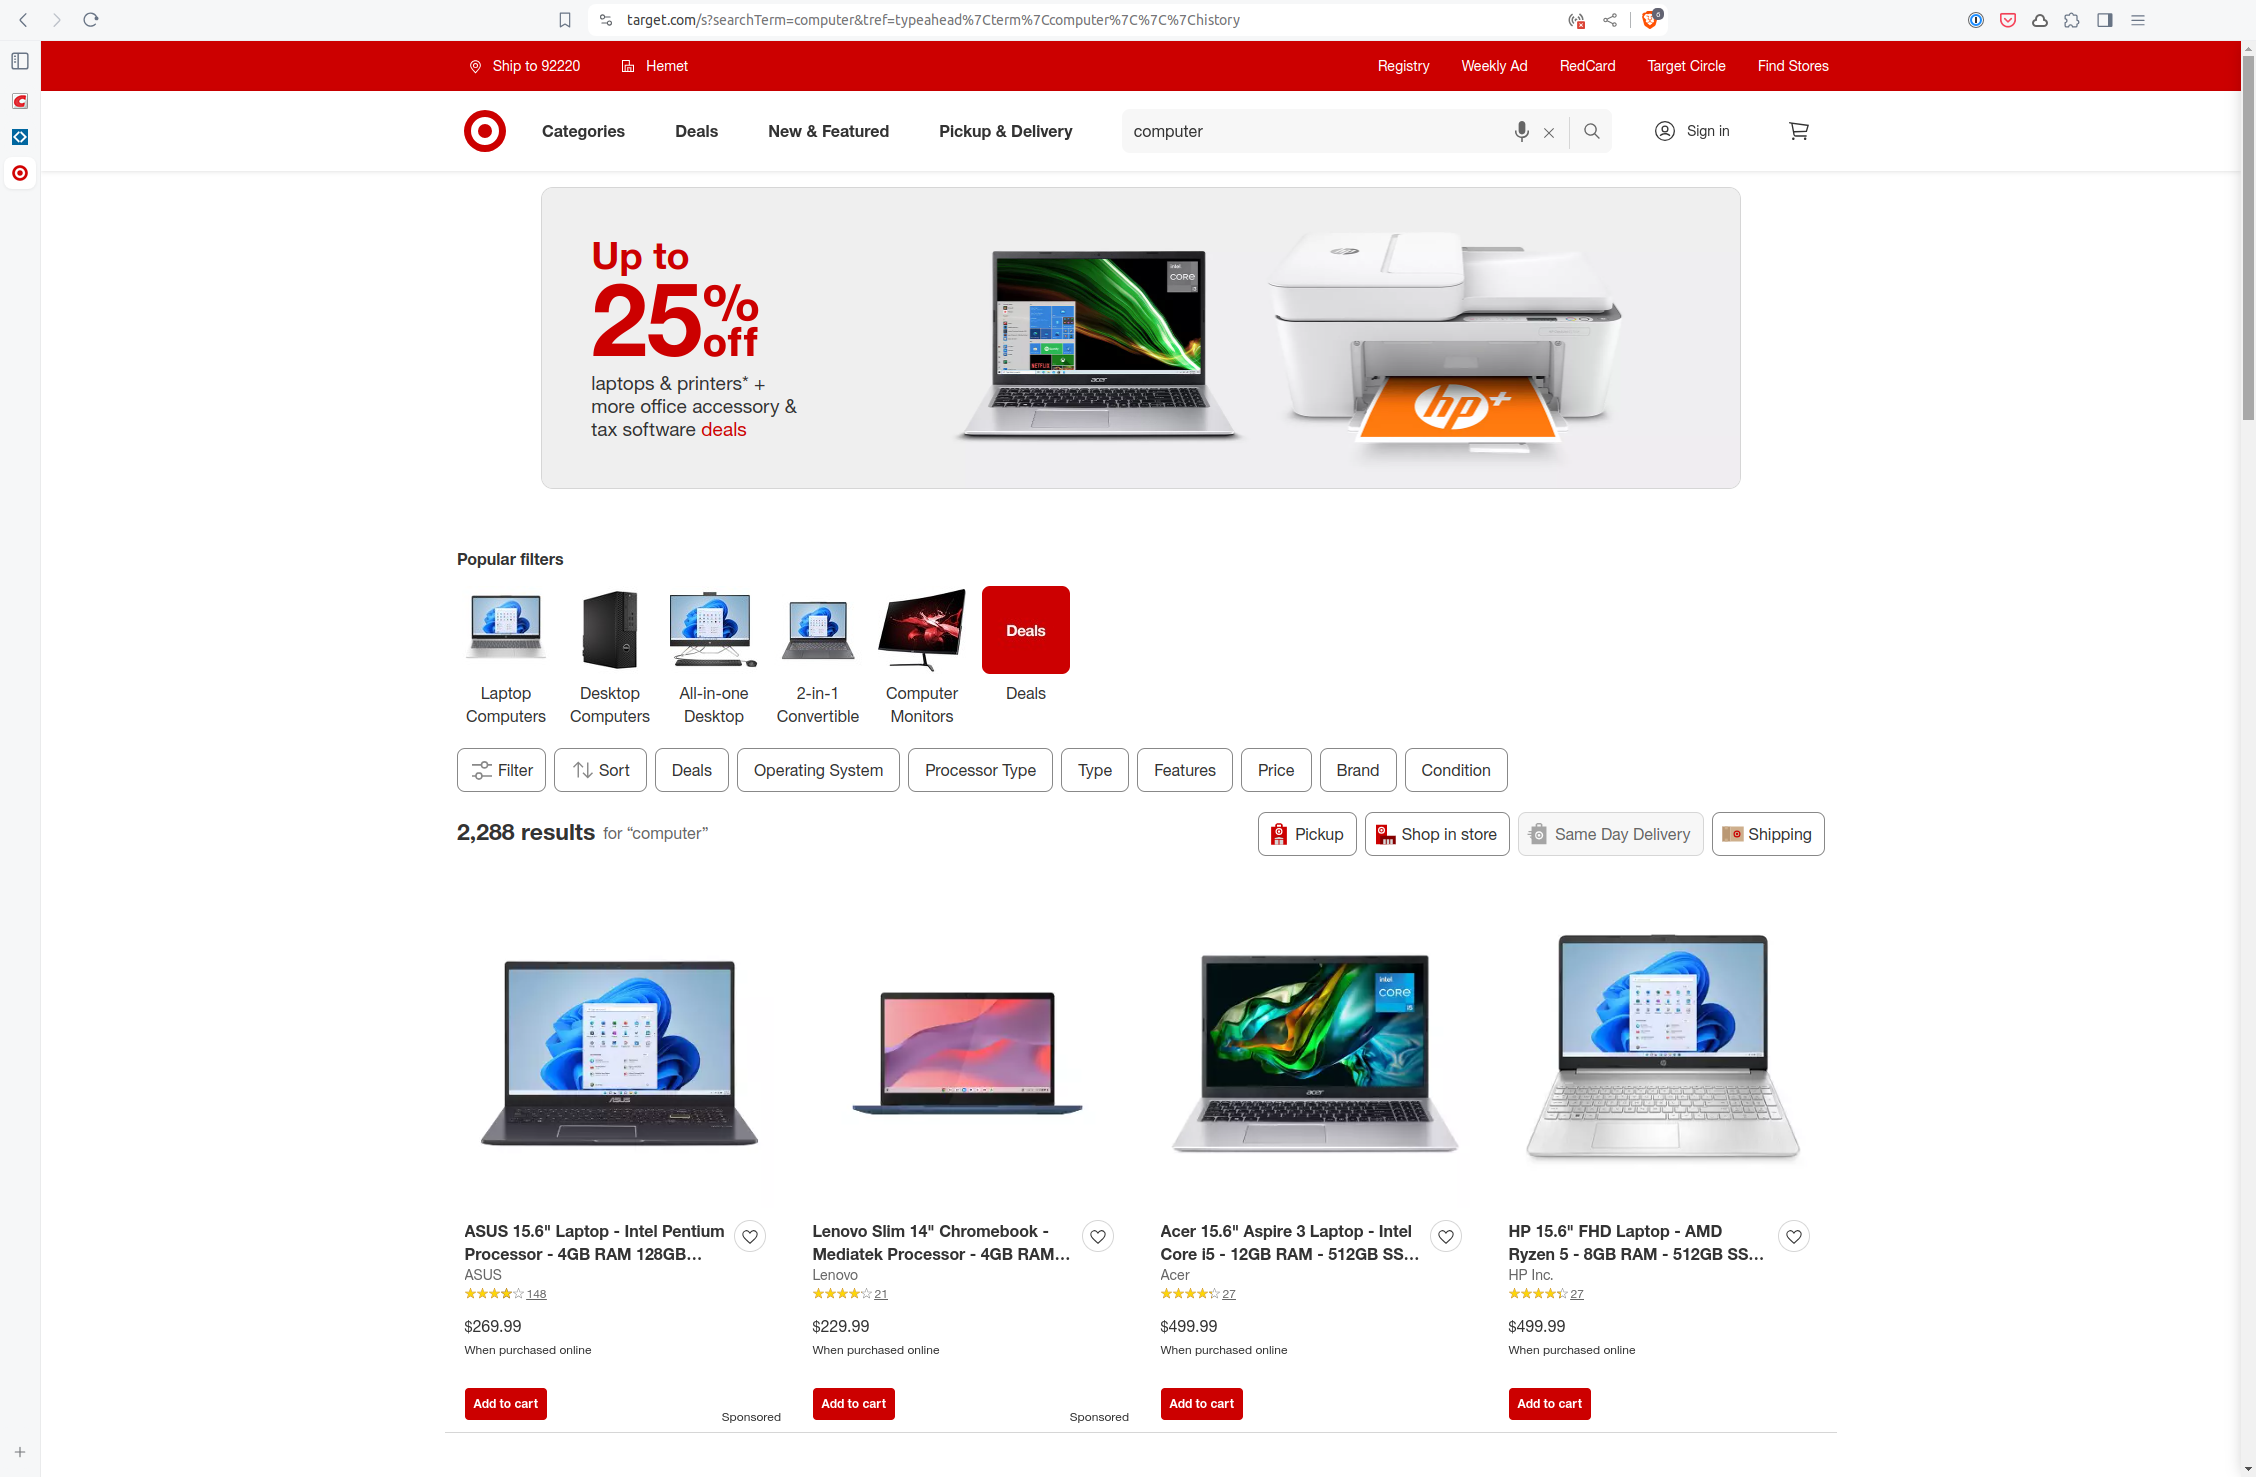 Target's page for computers